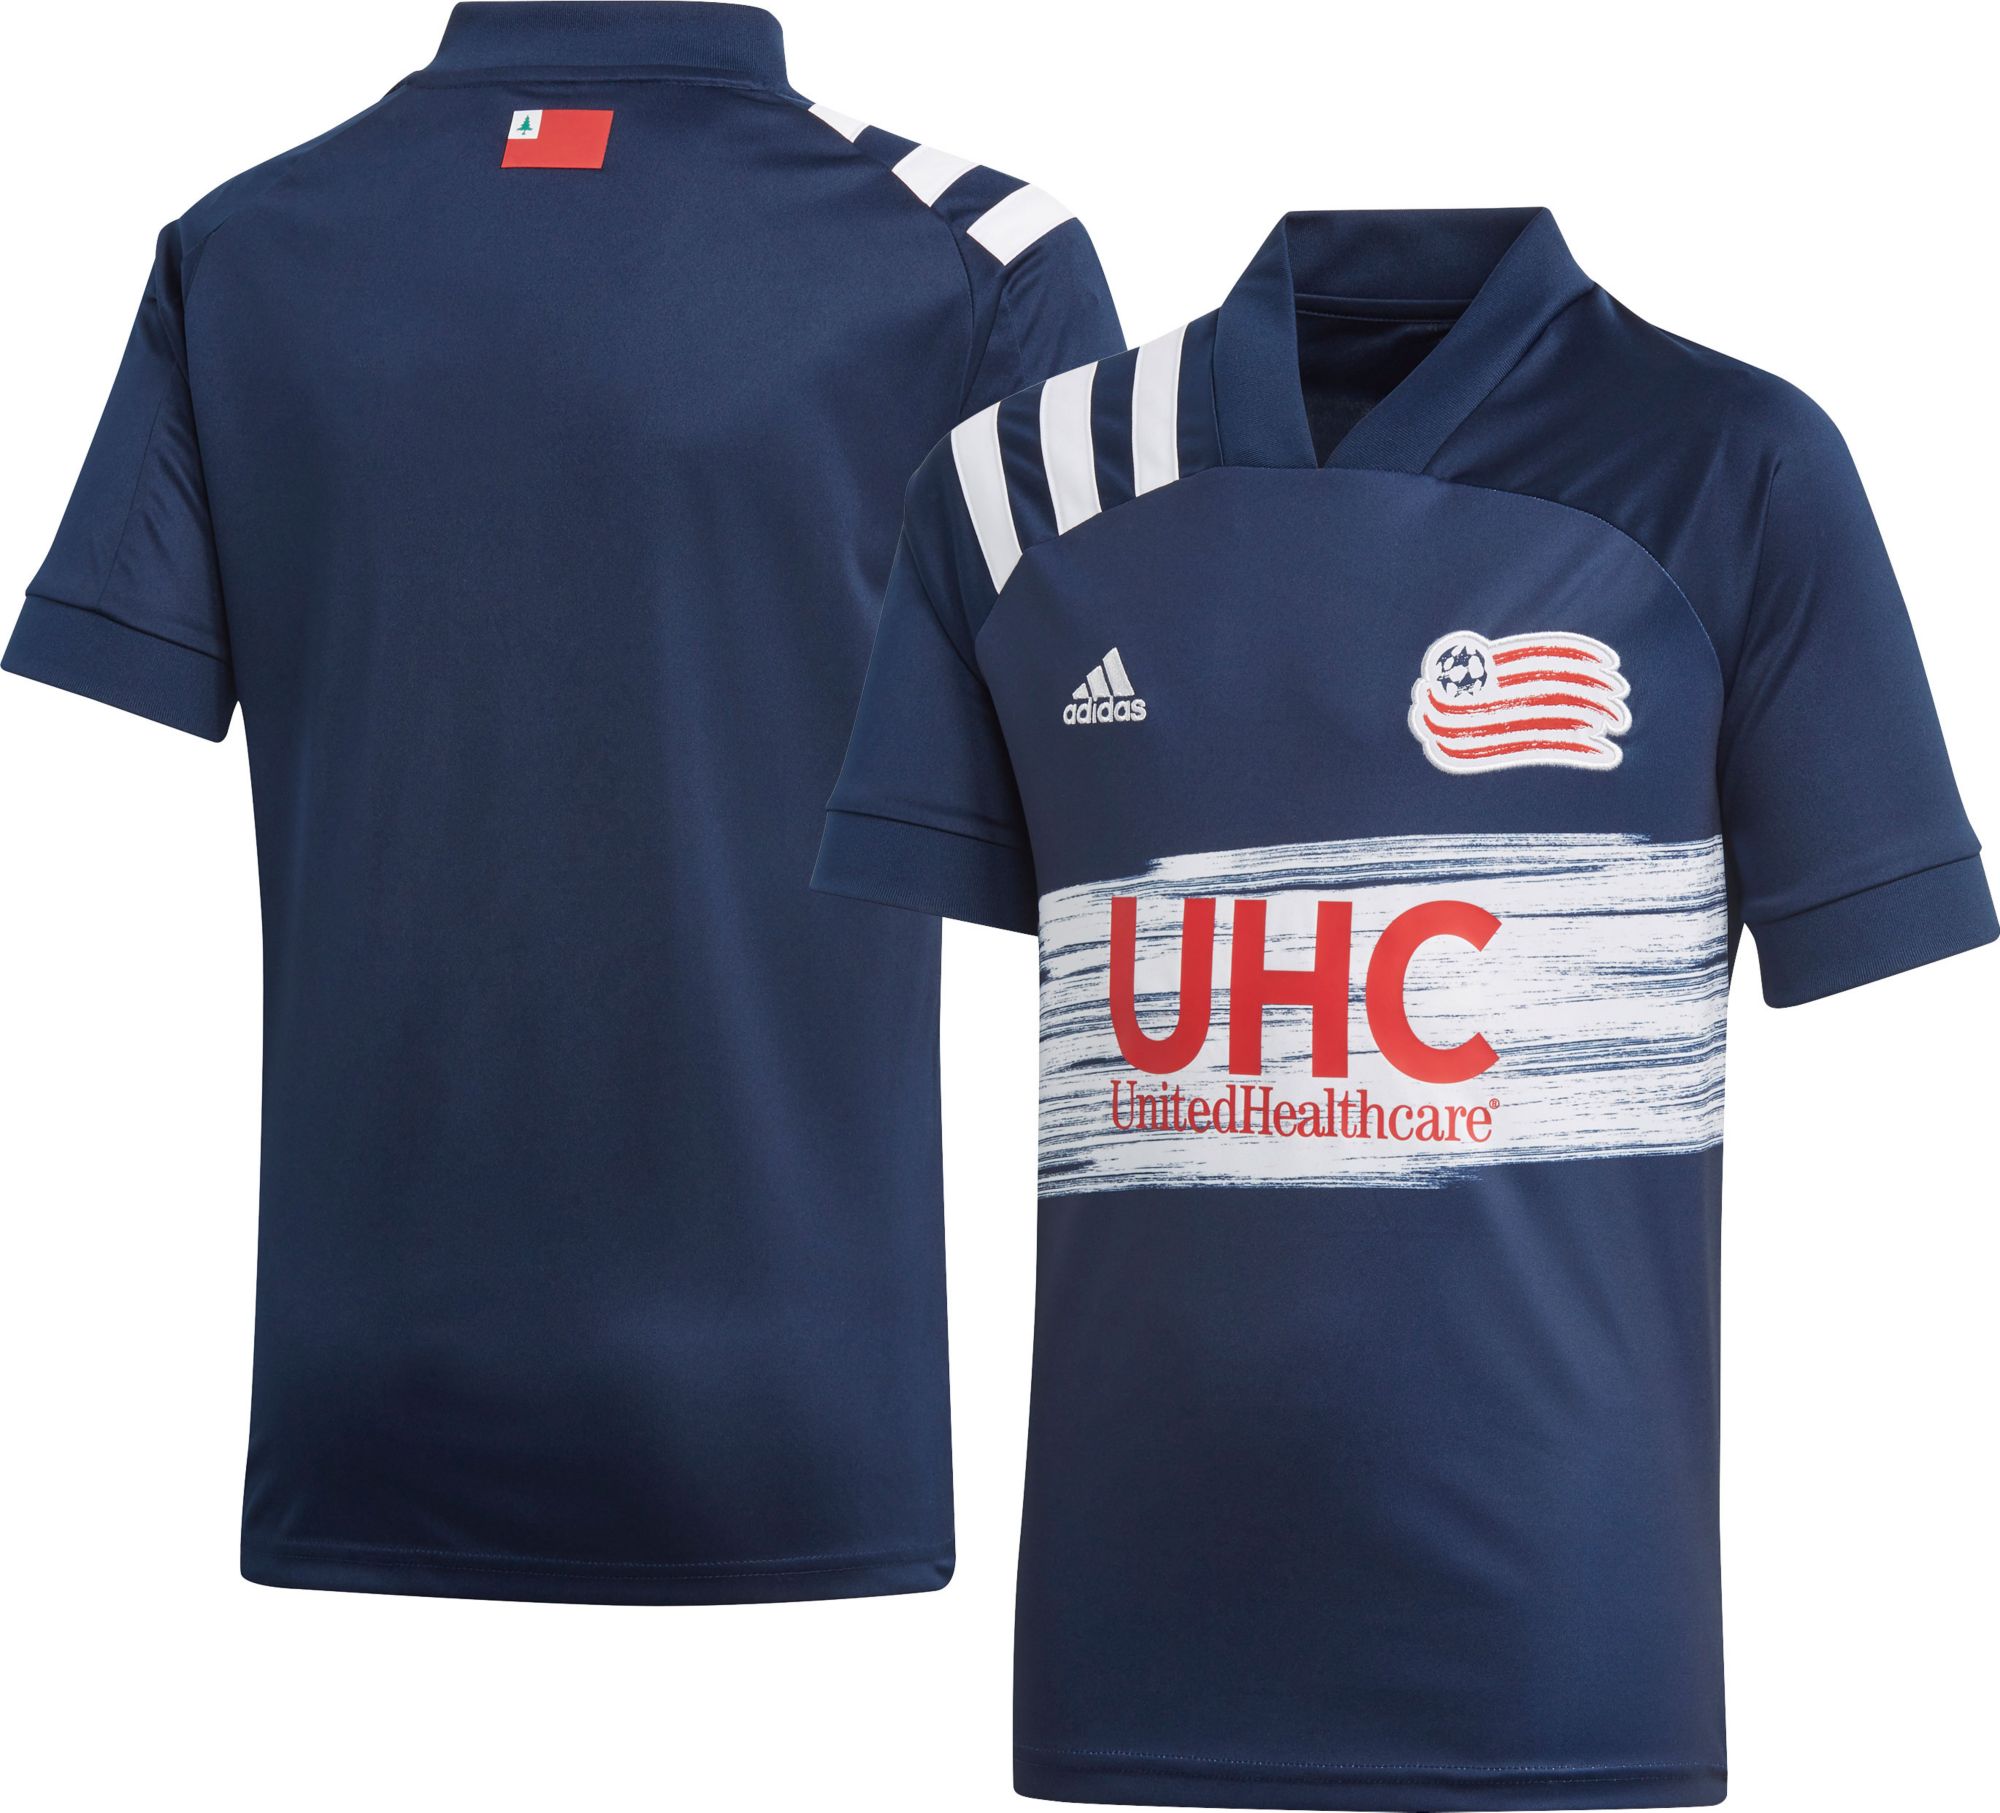 new england revolution youth jersey